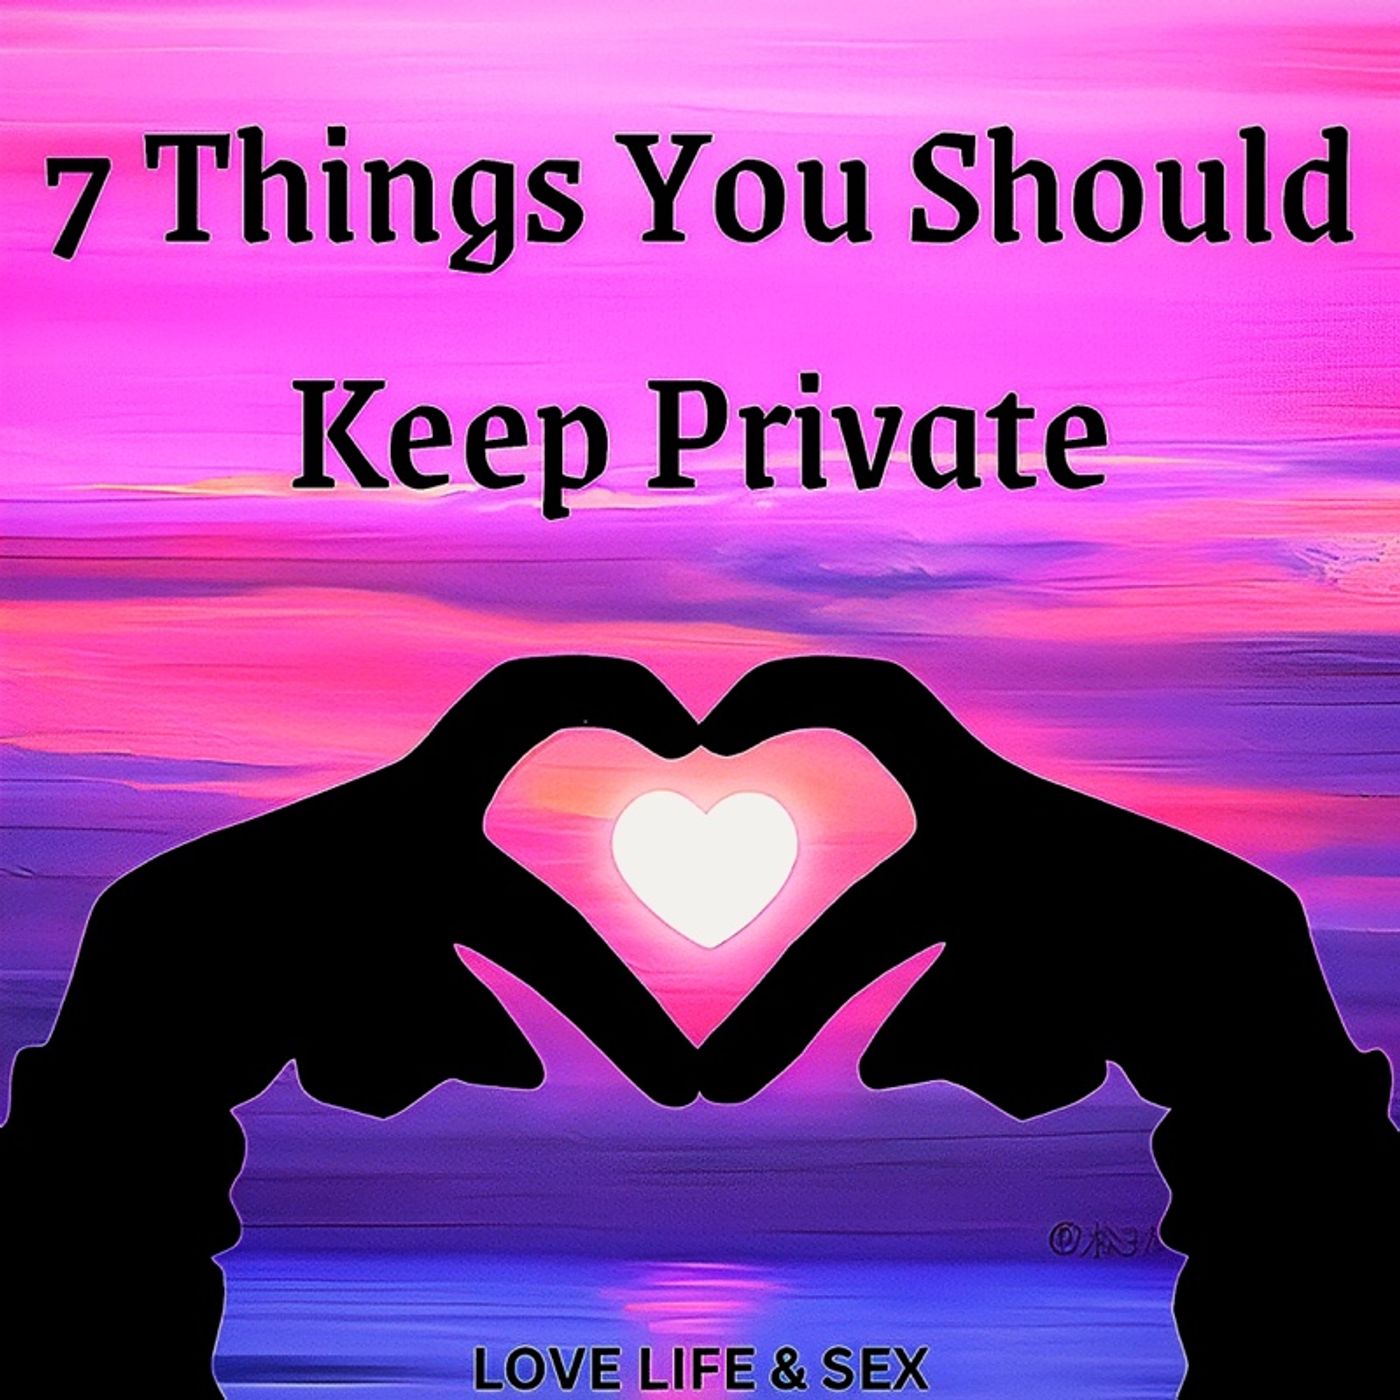 7 Things You Should Keep Private 🔐